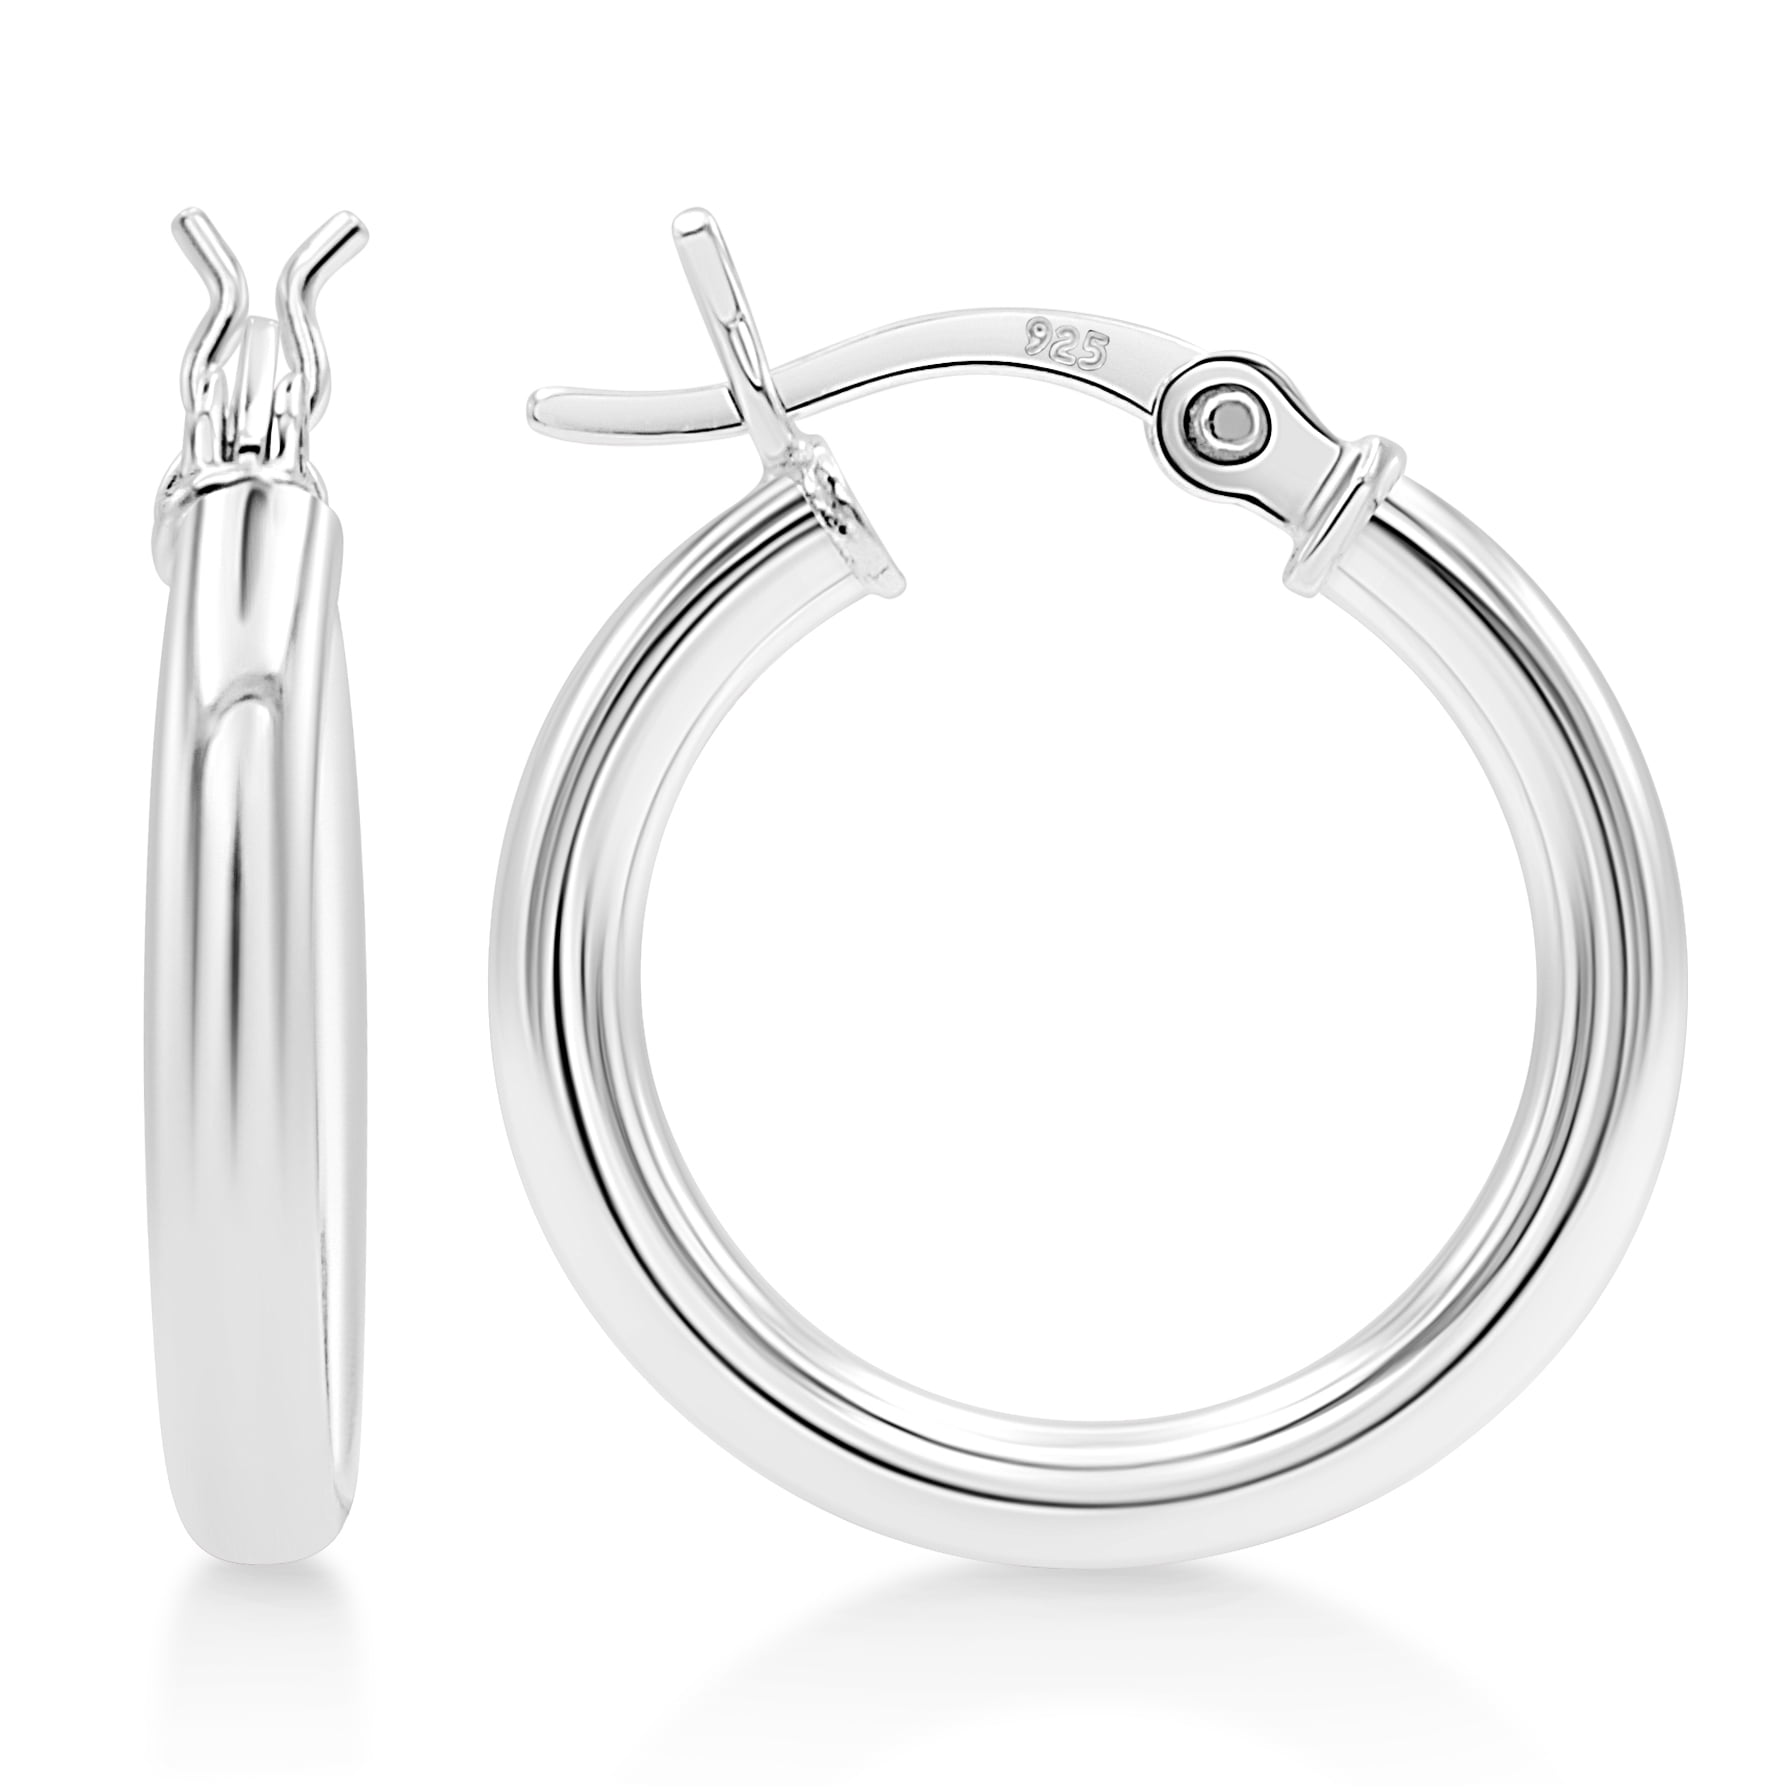 3 pr 925 Sterling Silver Classic Large Light Weight Smooth Shiny Hoop Earrings